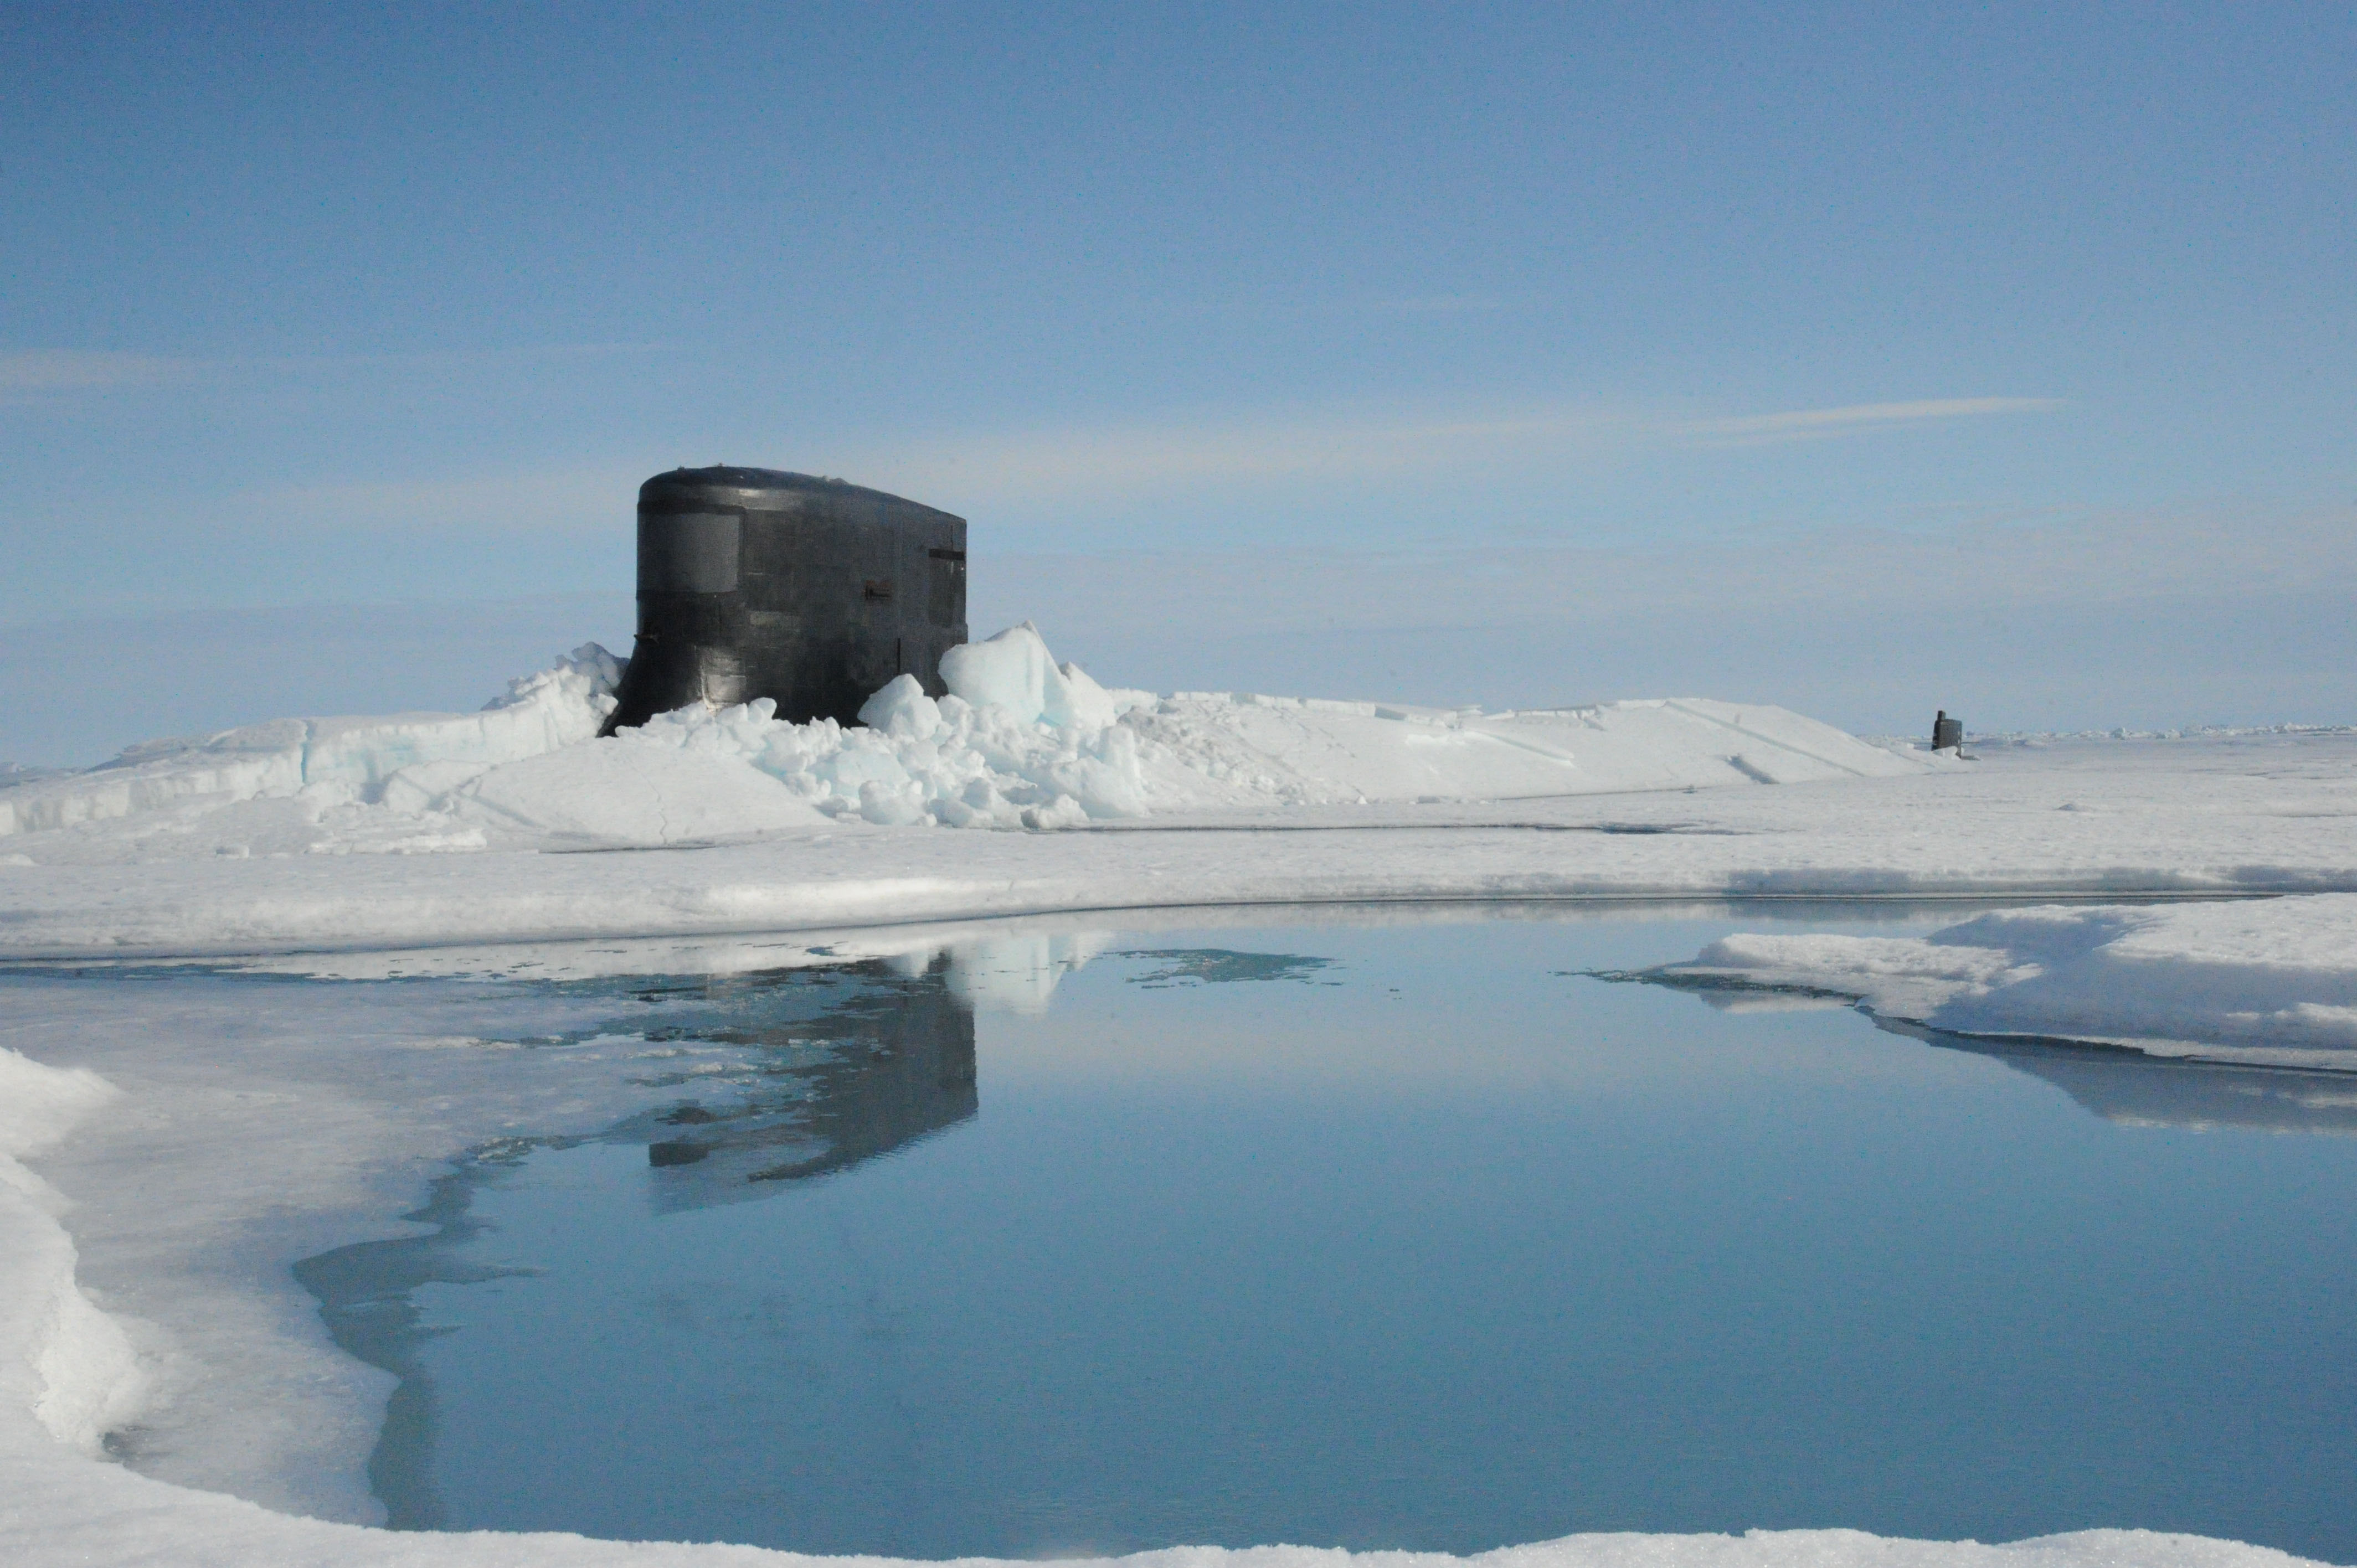 Fast attack submarine USS Seawolf (SSN-21) surfaces through Arctic ice at the North Pole on July 30, 2015. US Navy Photo